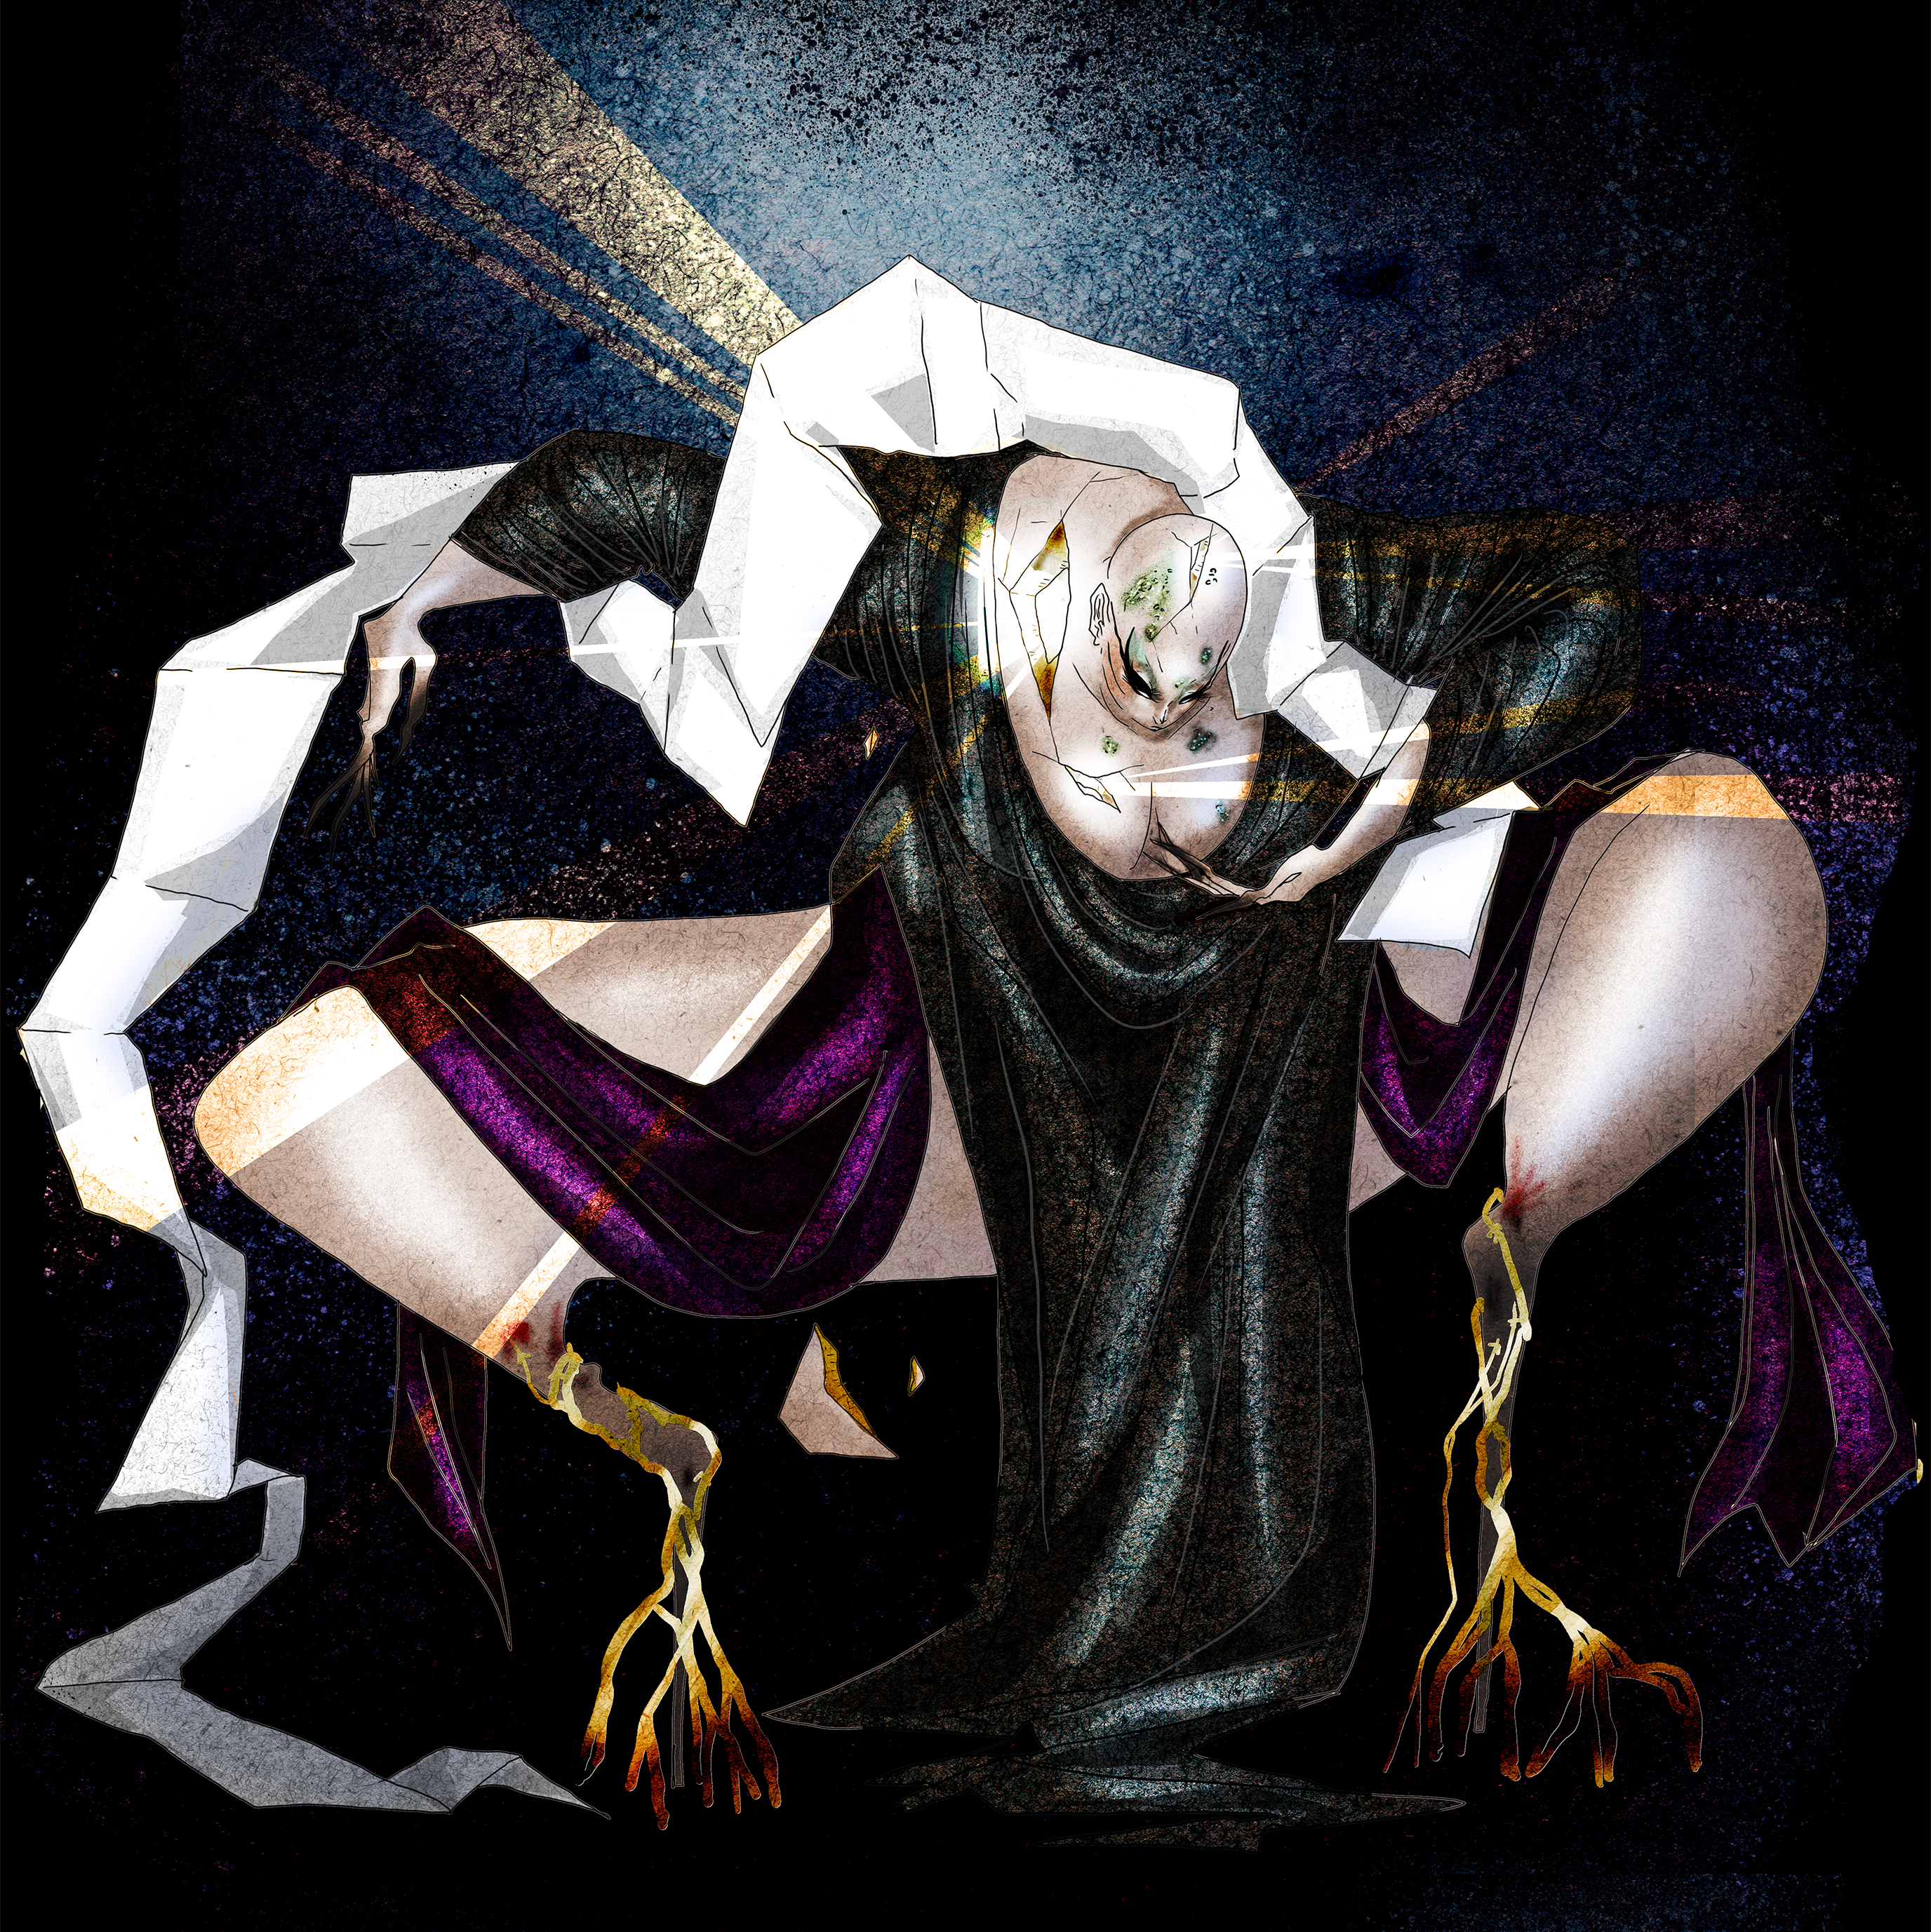 A drawing of a large busomed white drag performer squatting dancerly, shrouded in black, white, and purple fabrics